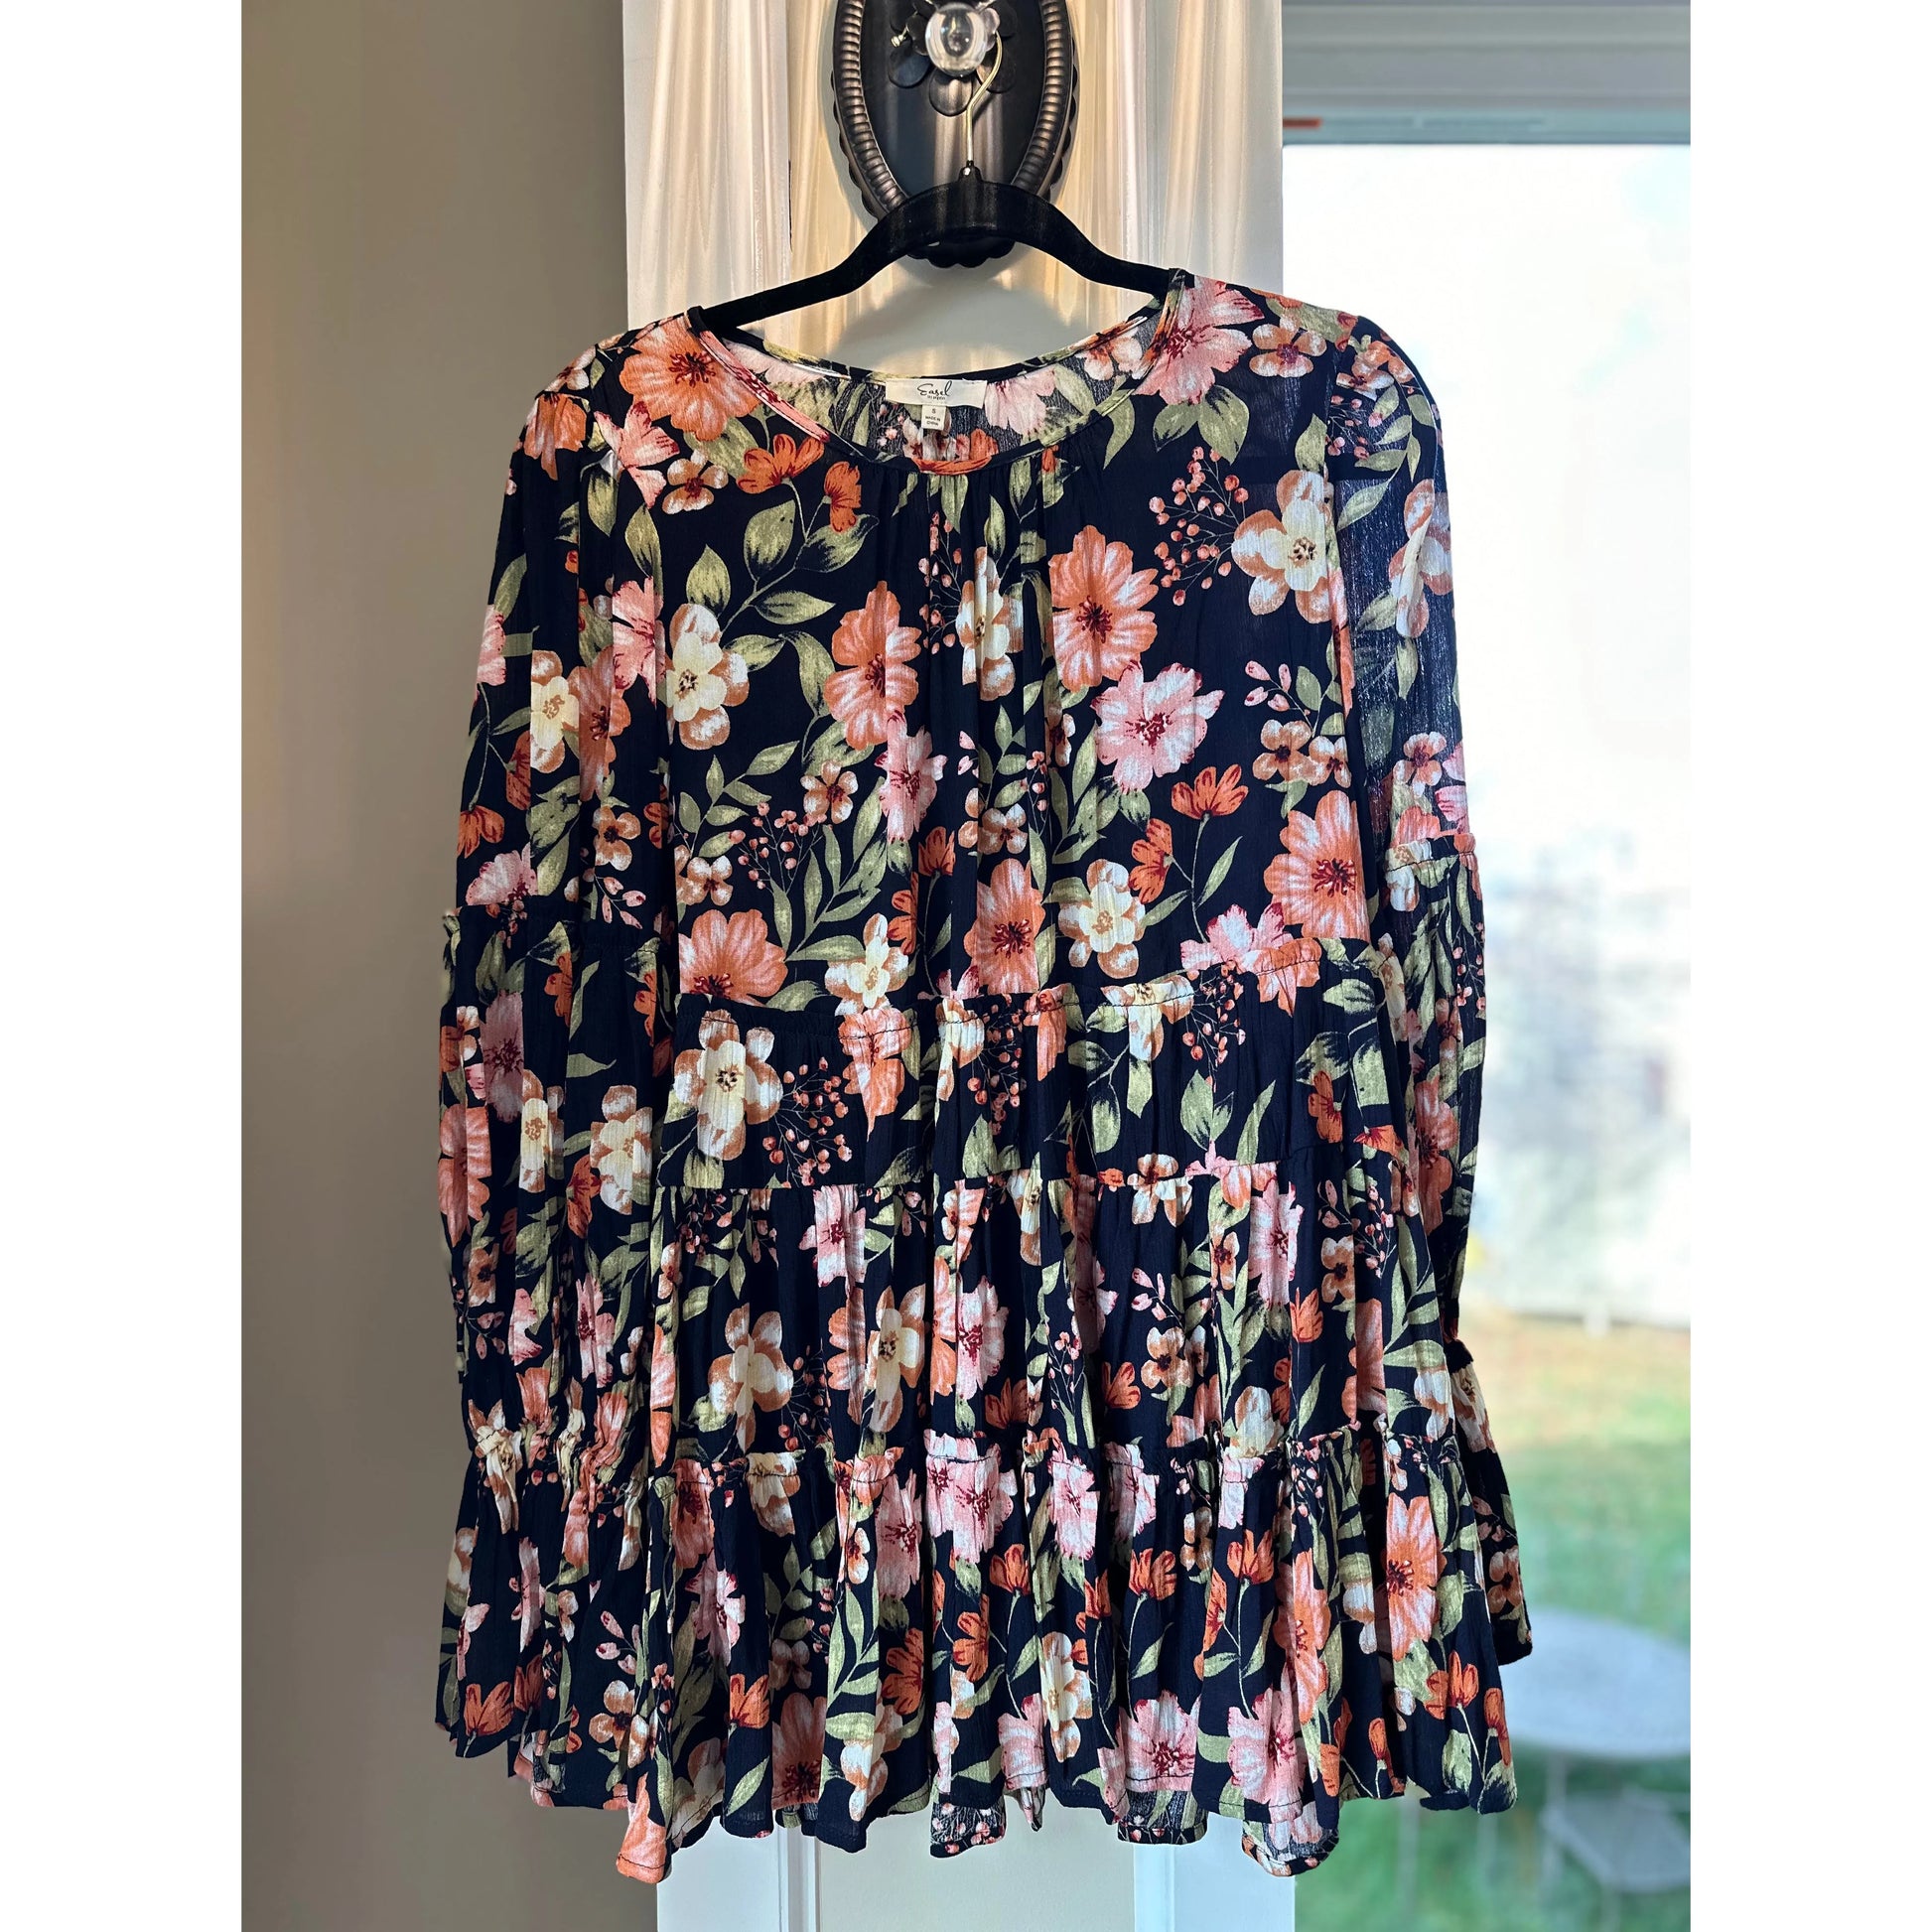 Shanique Floral Top - Rhapsody and Renascence